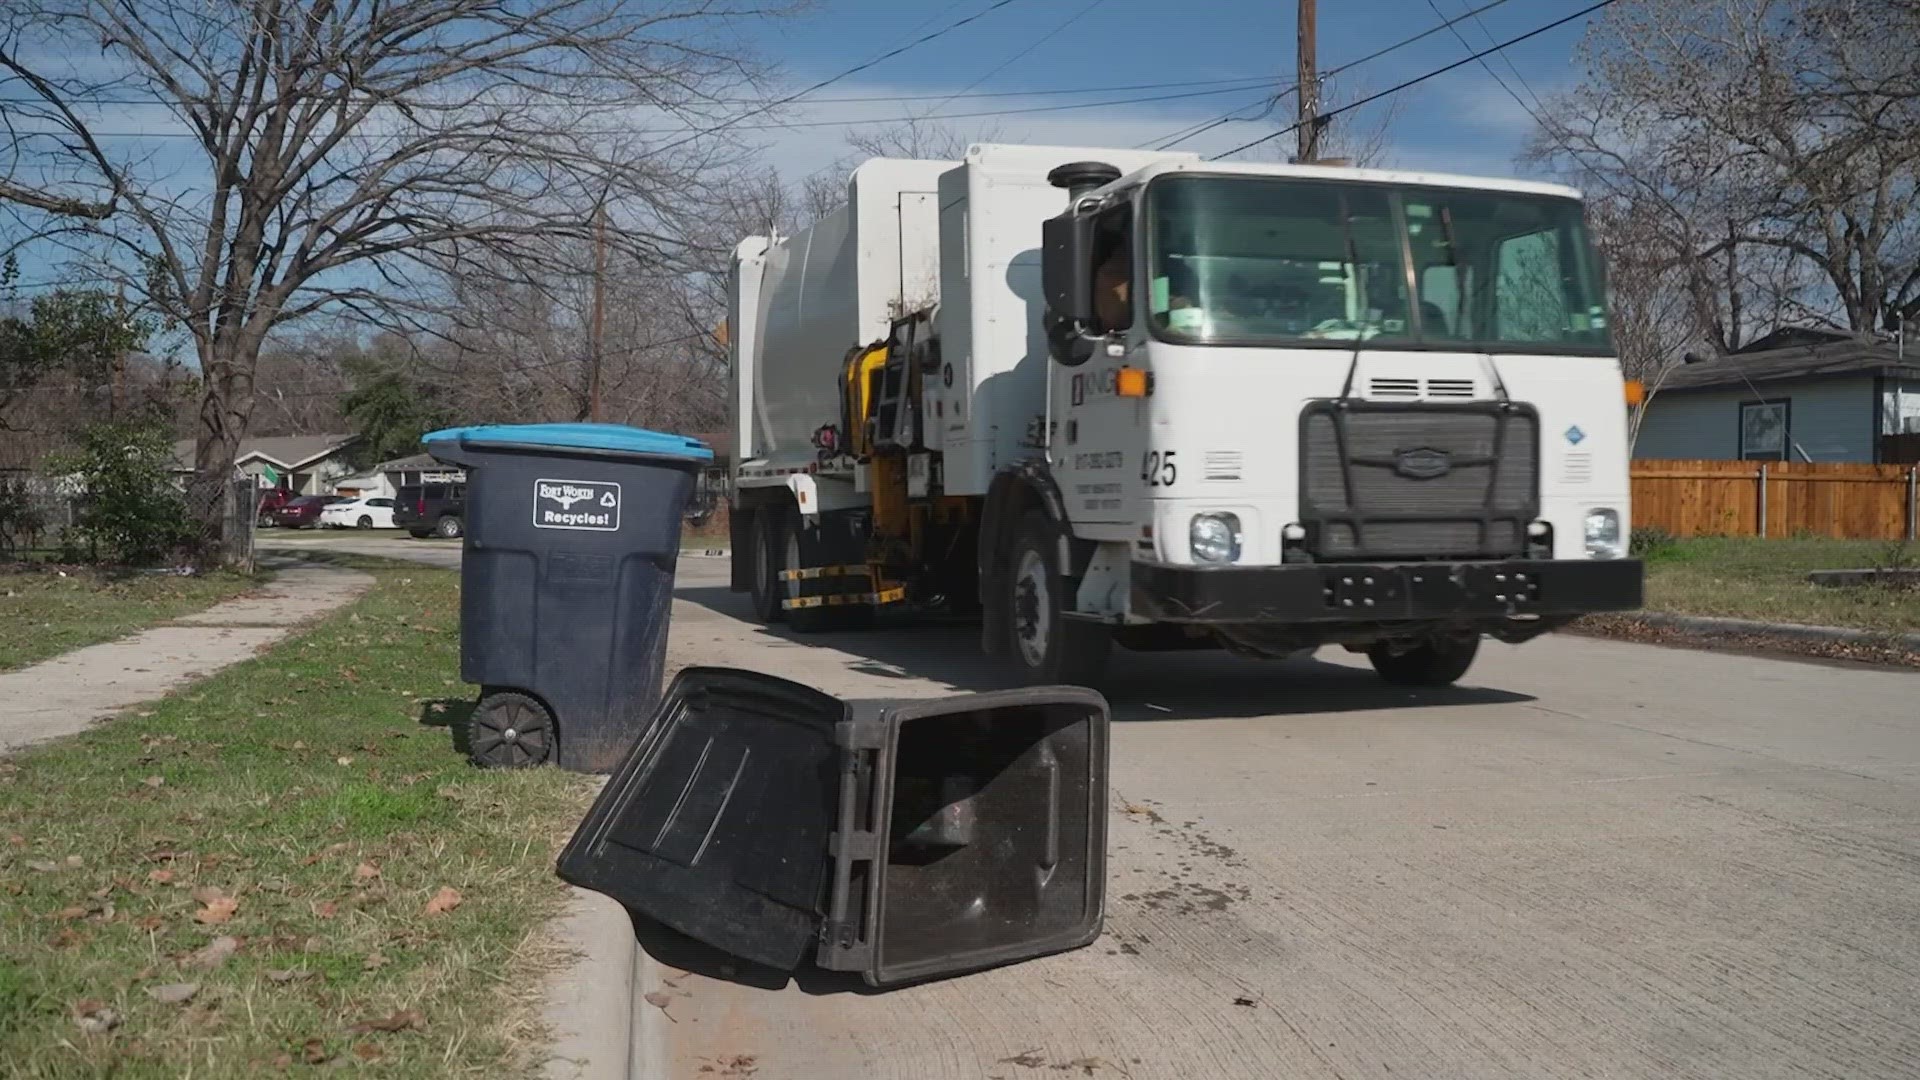 Beginning this week, Fort Worth residents will pay $6 for overflowing garbage bins and $3 for each loose bag at the curb.